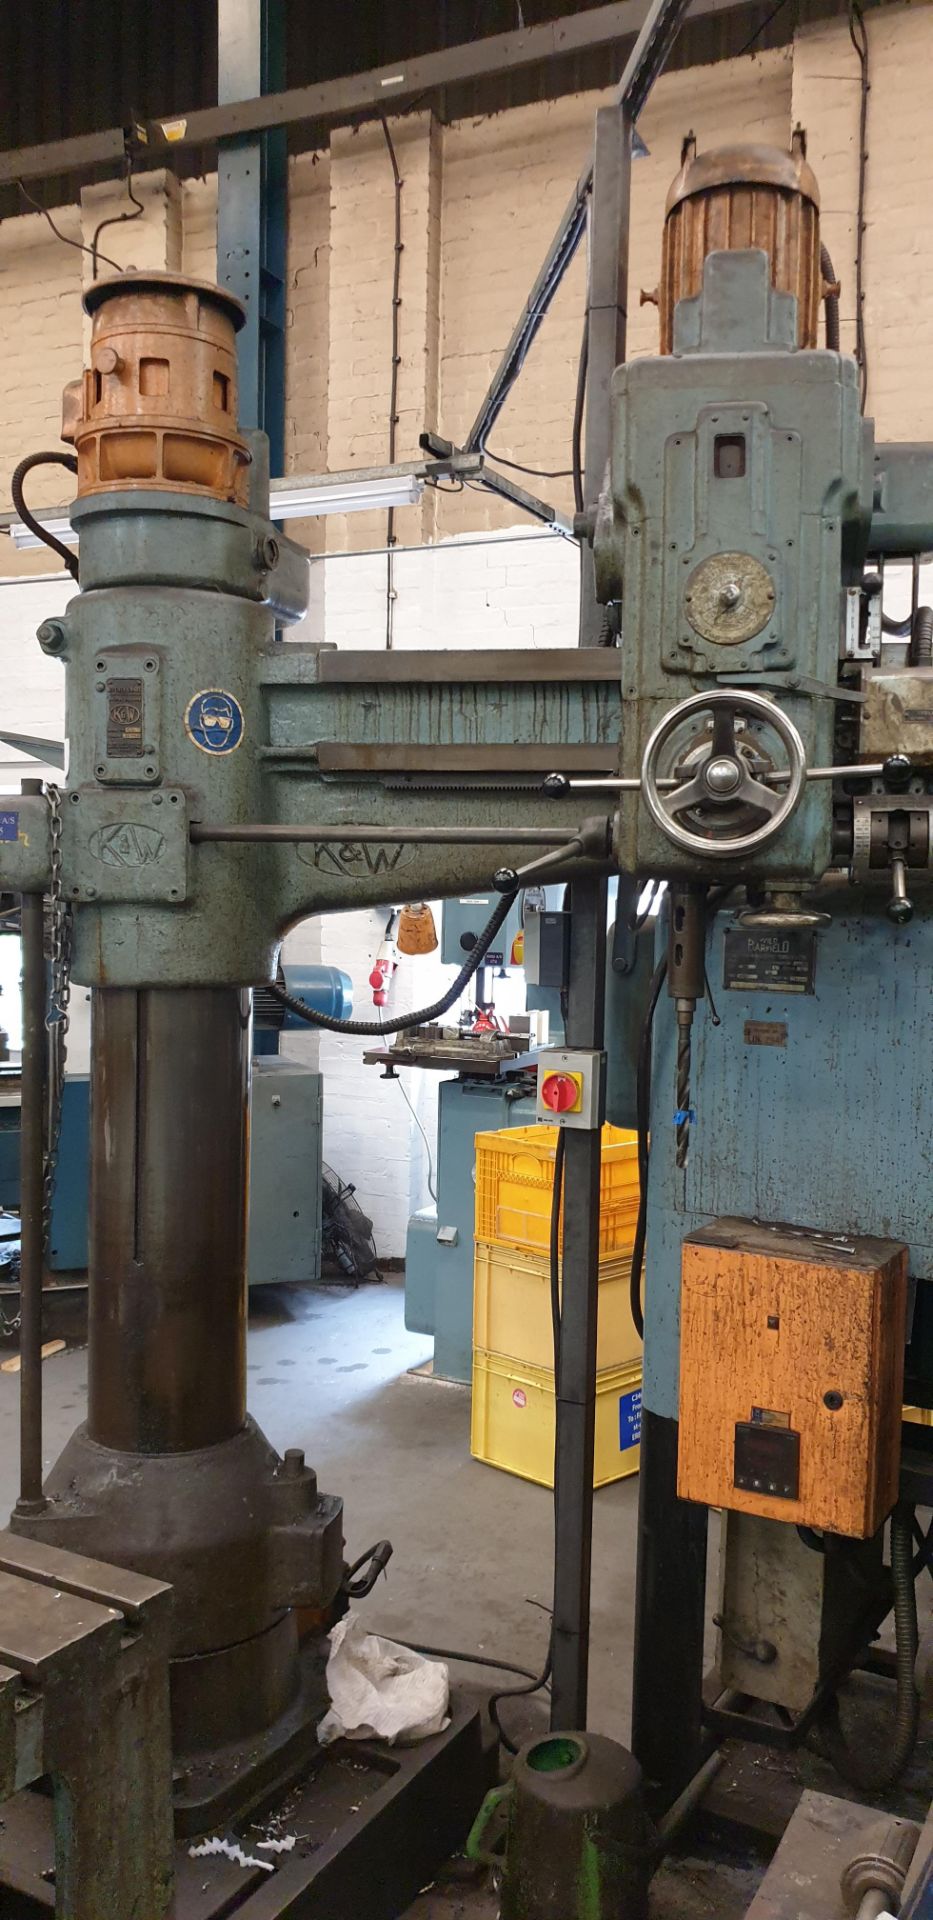 Kitchen & Wade E25 Radial Arm Drilling Machine With Loose Box Table, Jet Brake, Radius Approx. 1100m - Image 2 of 3